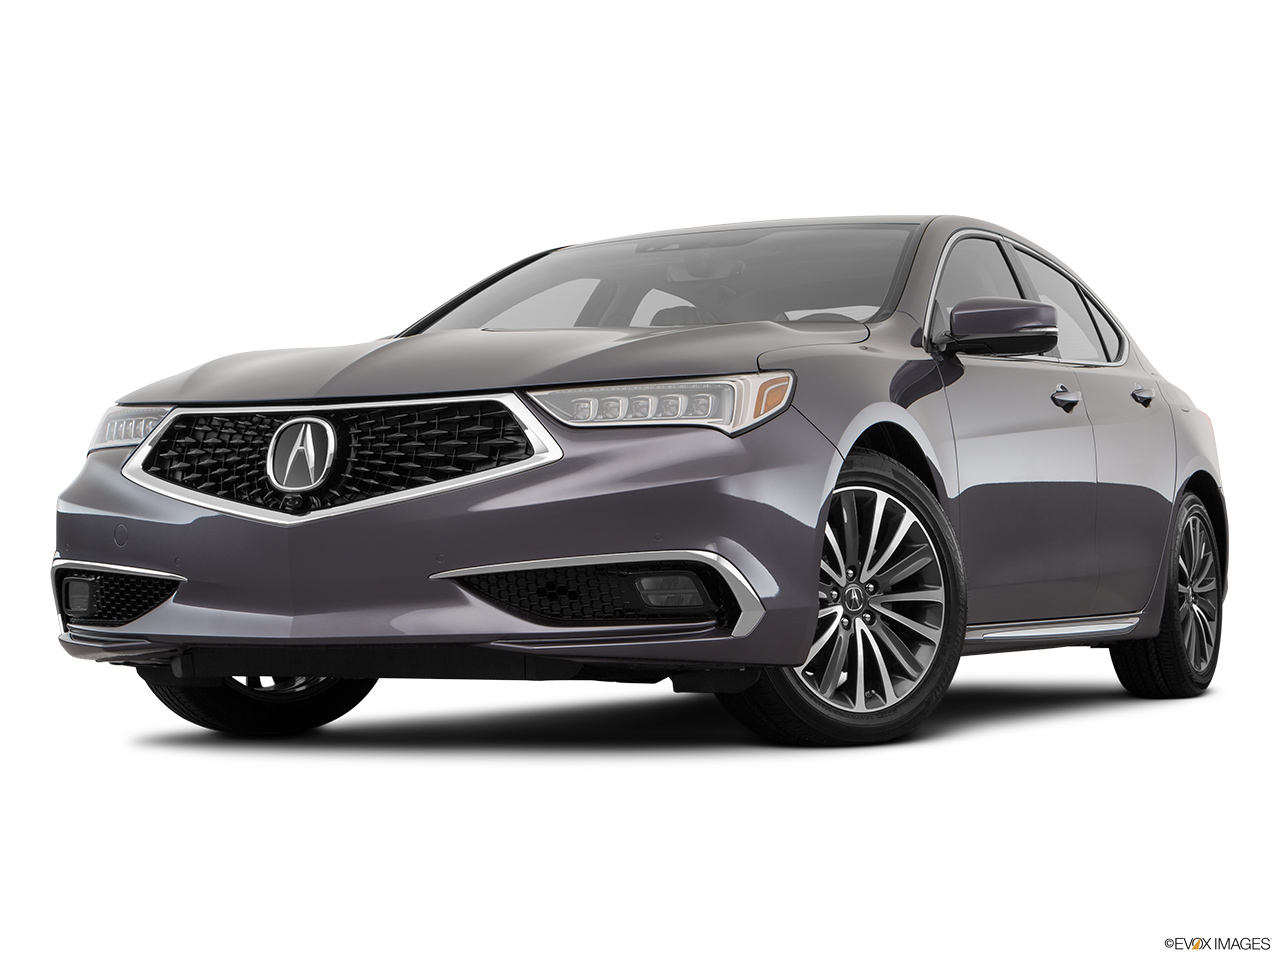 2018 Acura TLX 3.5L Front angle view, low wide perspective. 